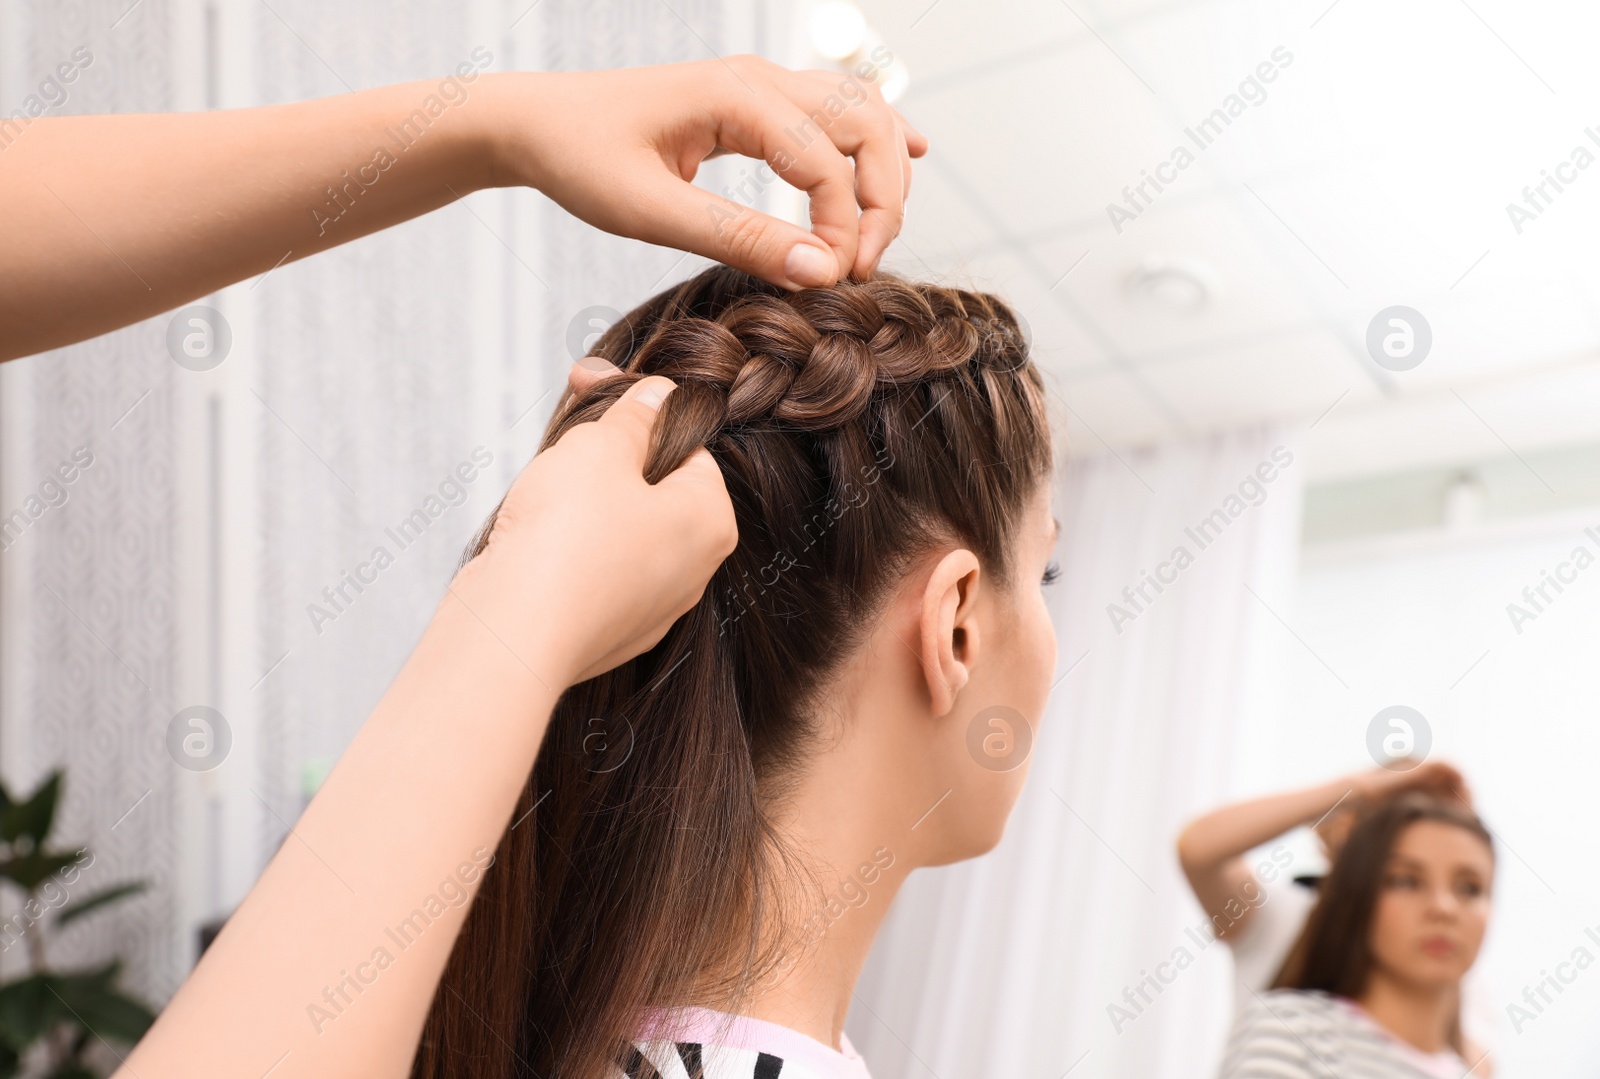 Photo of Professional stylist braiding client's hair in salon